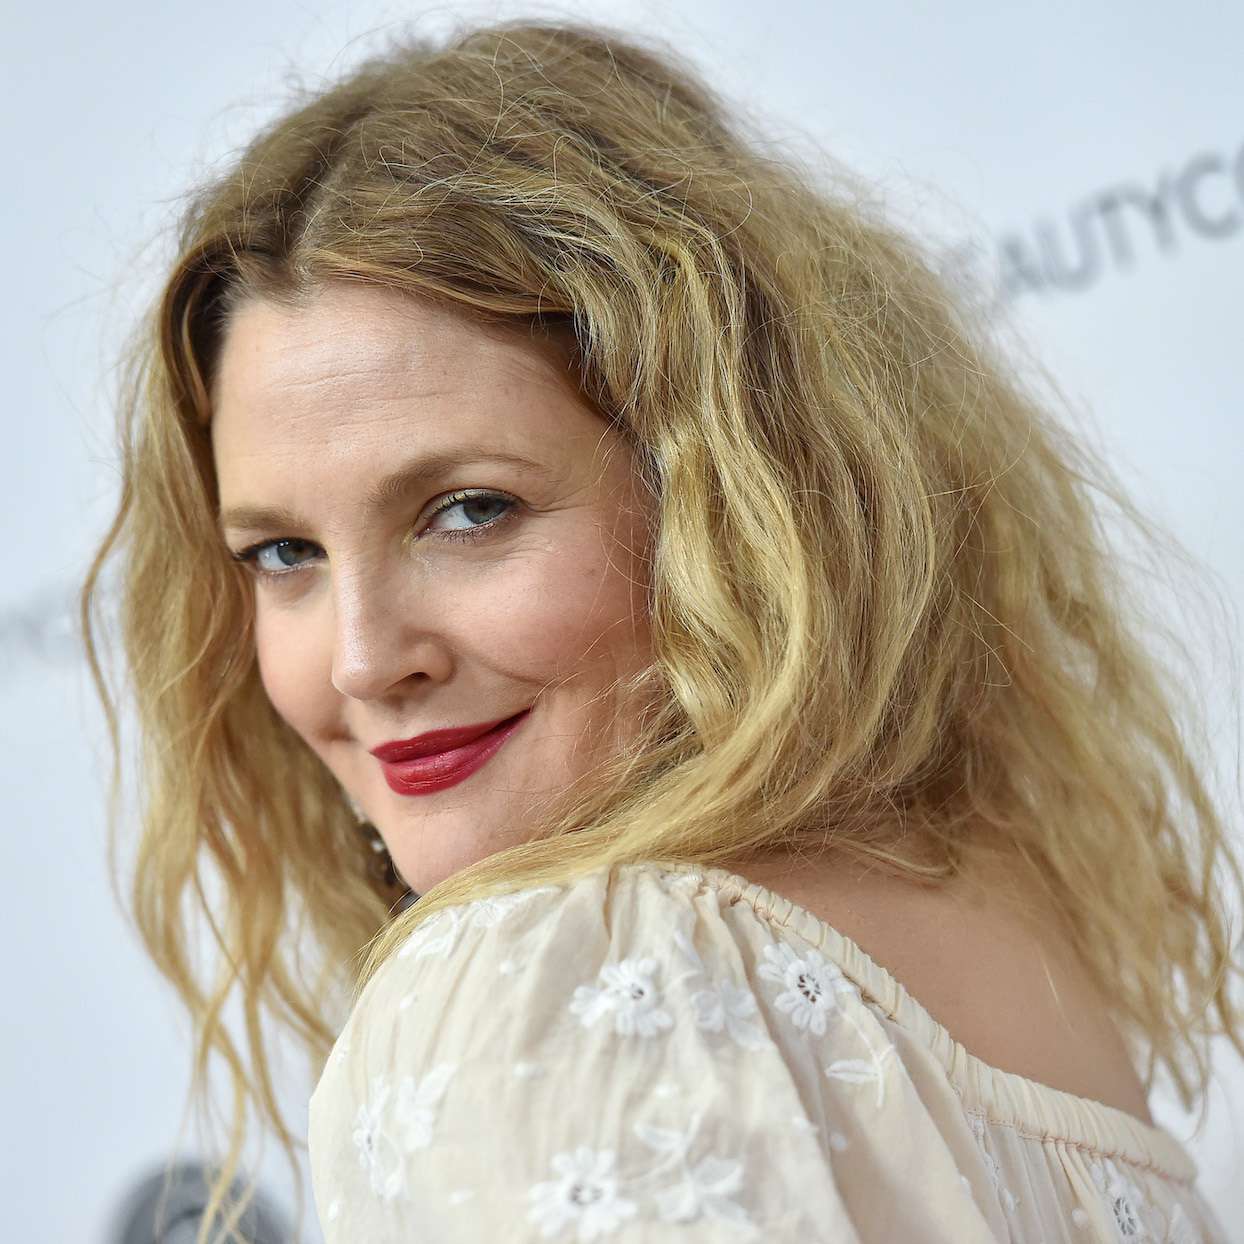 Drew Barrymore Revealed the One Trick That Helps Her "Make Peace" with Maskne